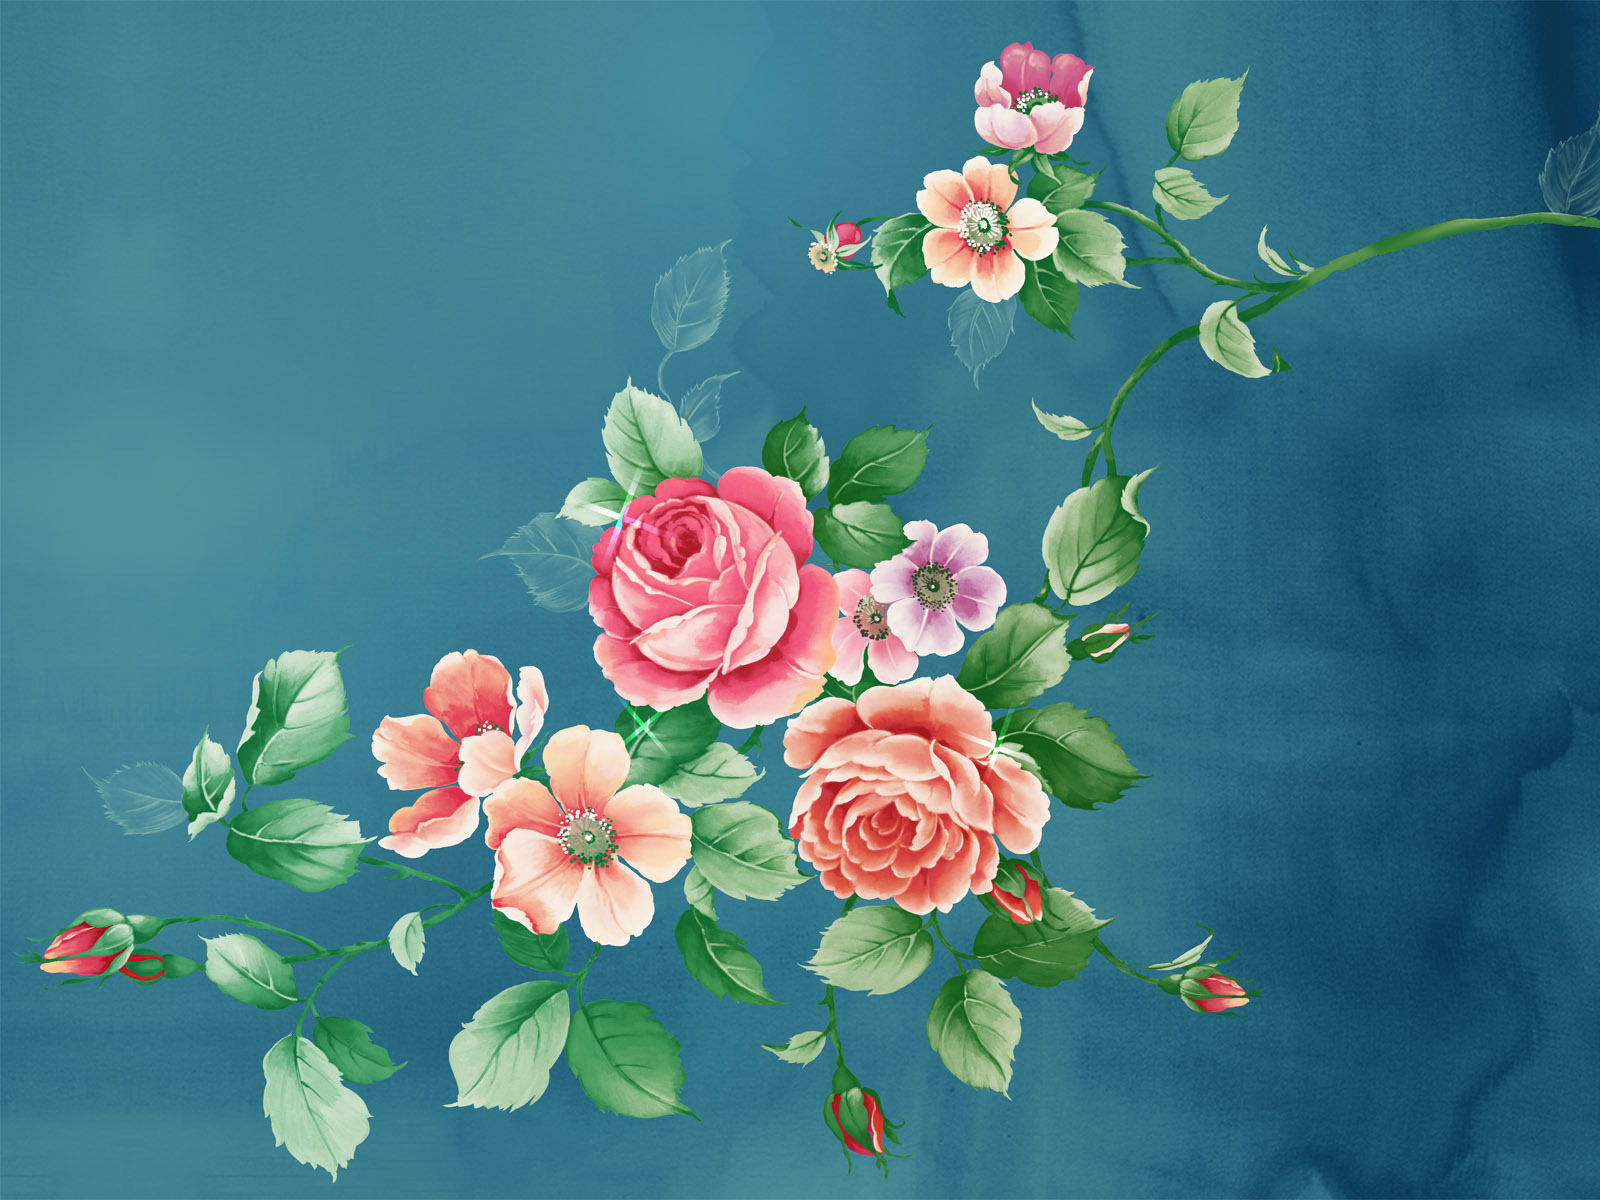 plants, roses, pictures, flowers, turquoise cell phone wallpapers